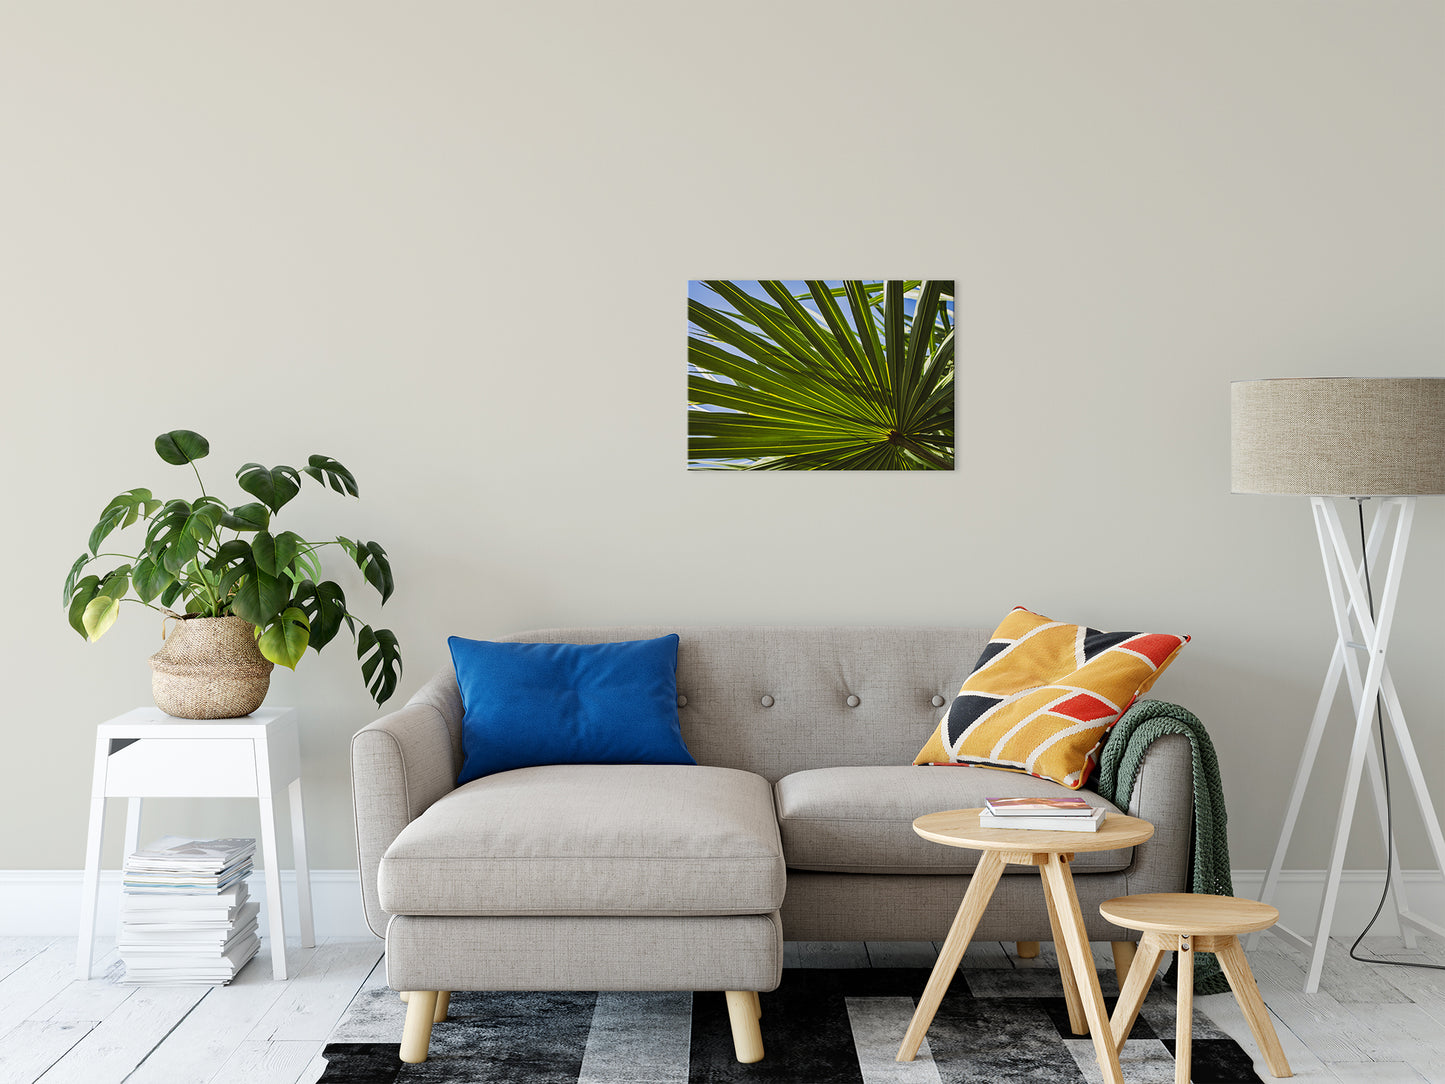 Colorized Wide Palm Leaves Nature / Botanical Photo Fine Art Canvas Wall Art Prints 20" x 24" - PIPAFINEART